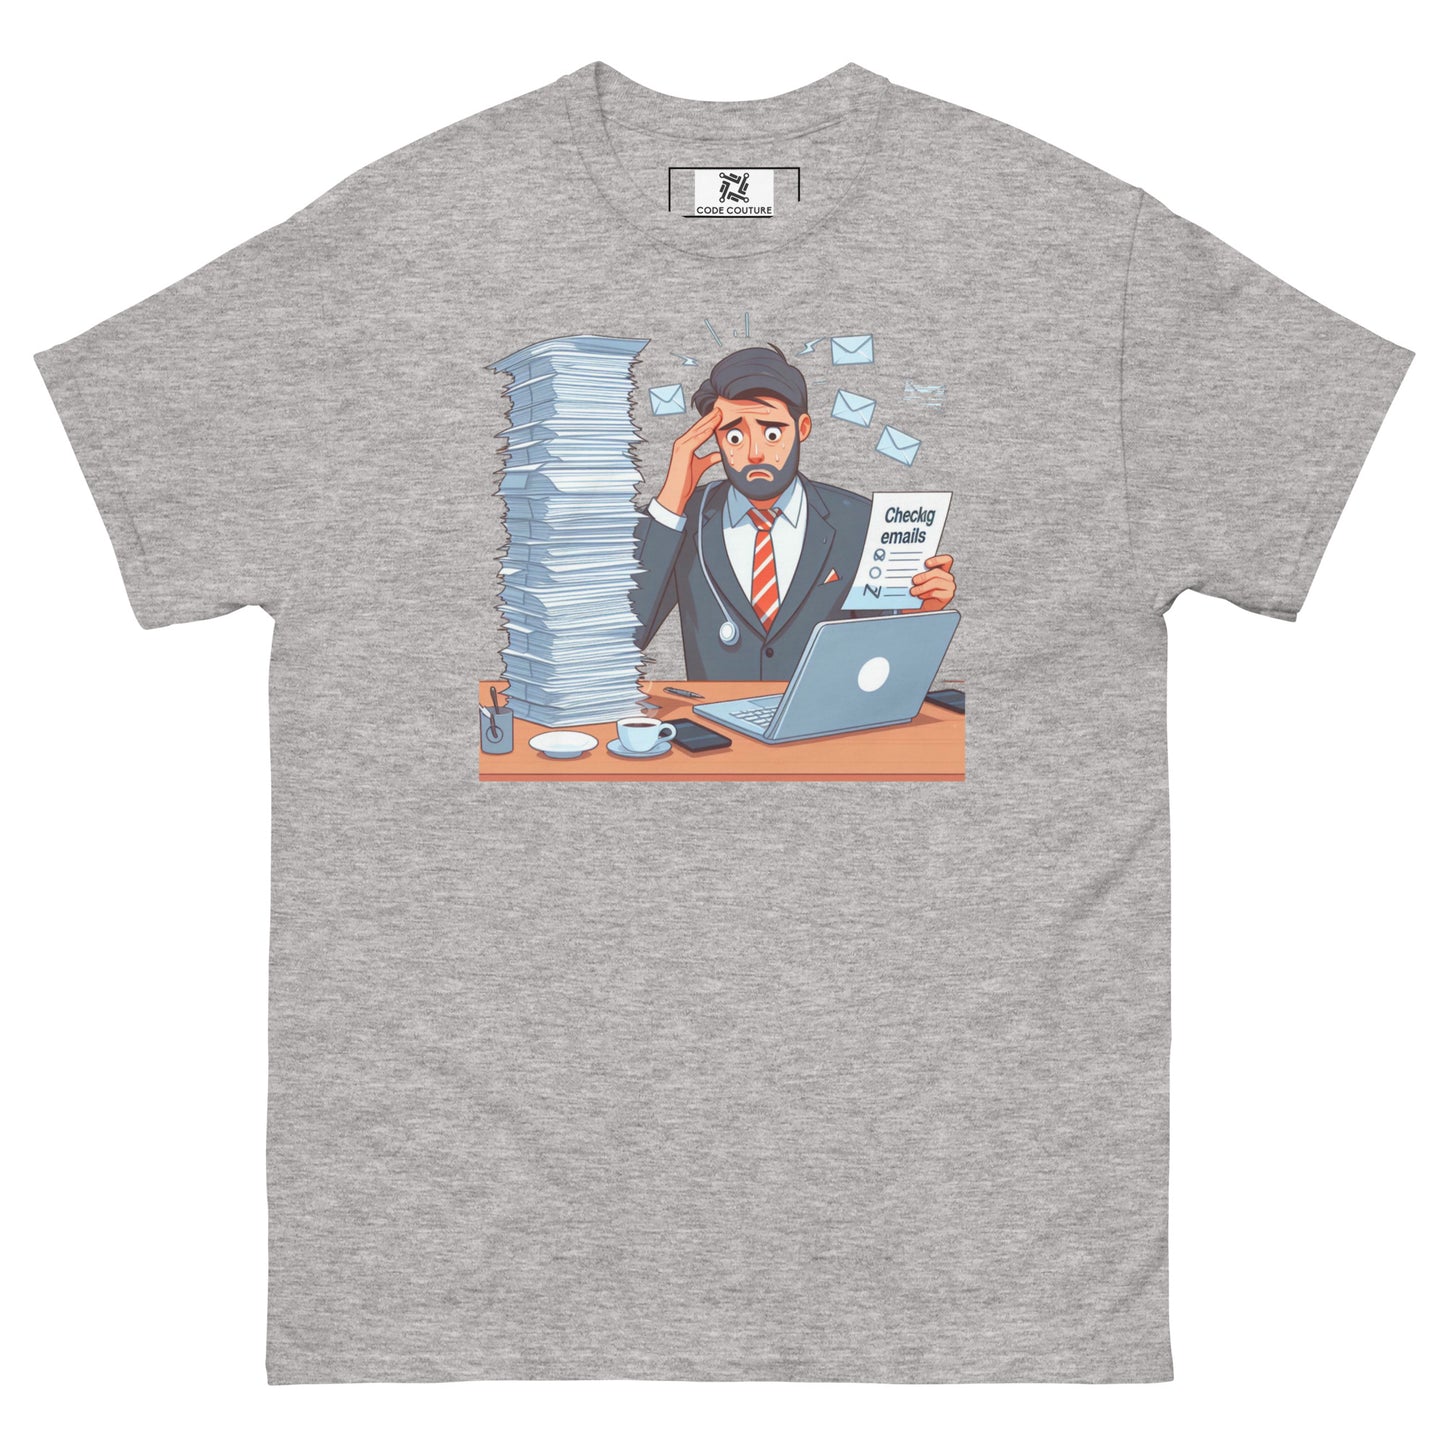 Checking Emails tee